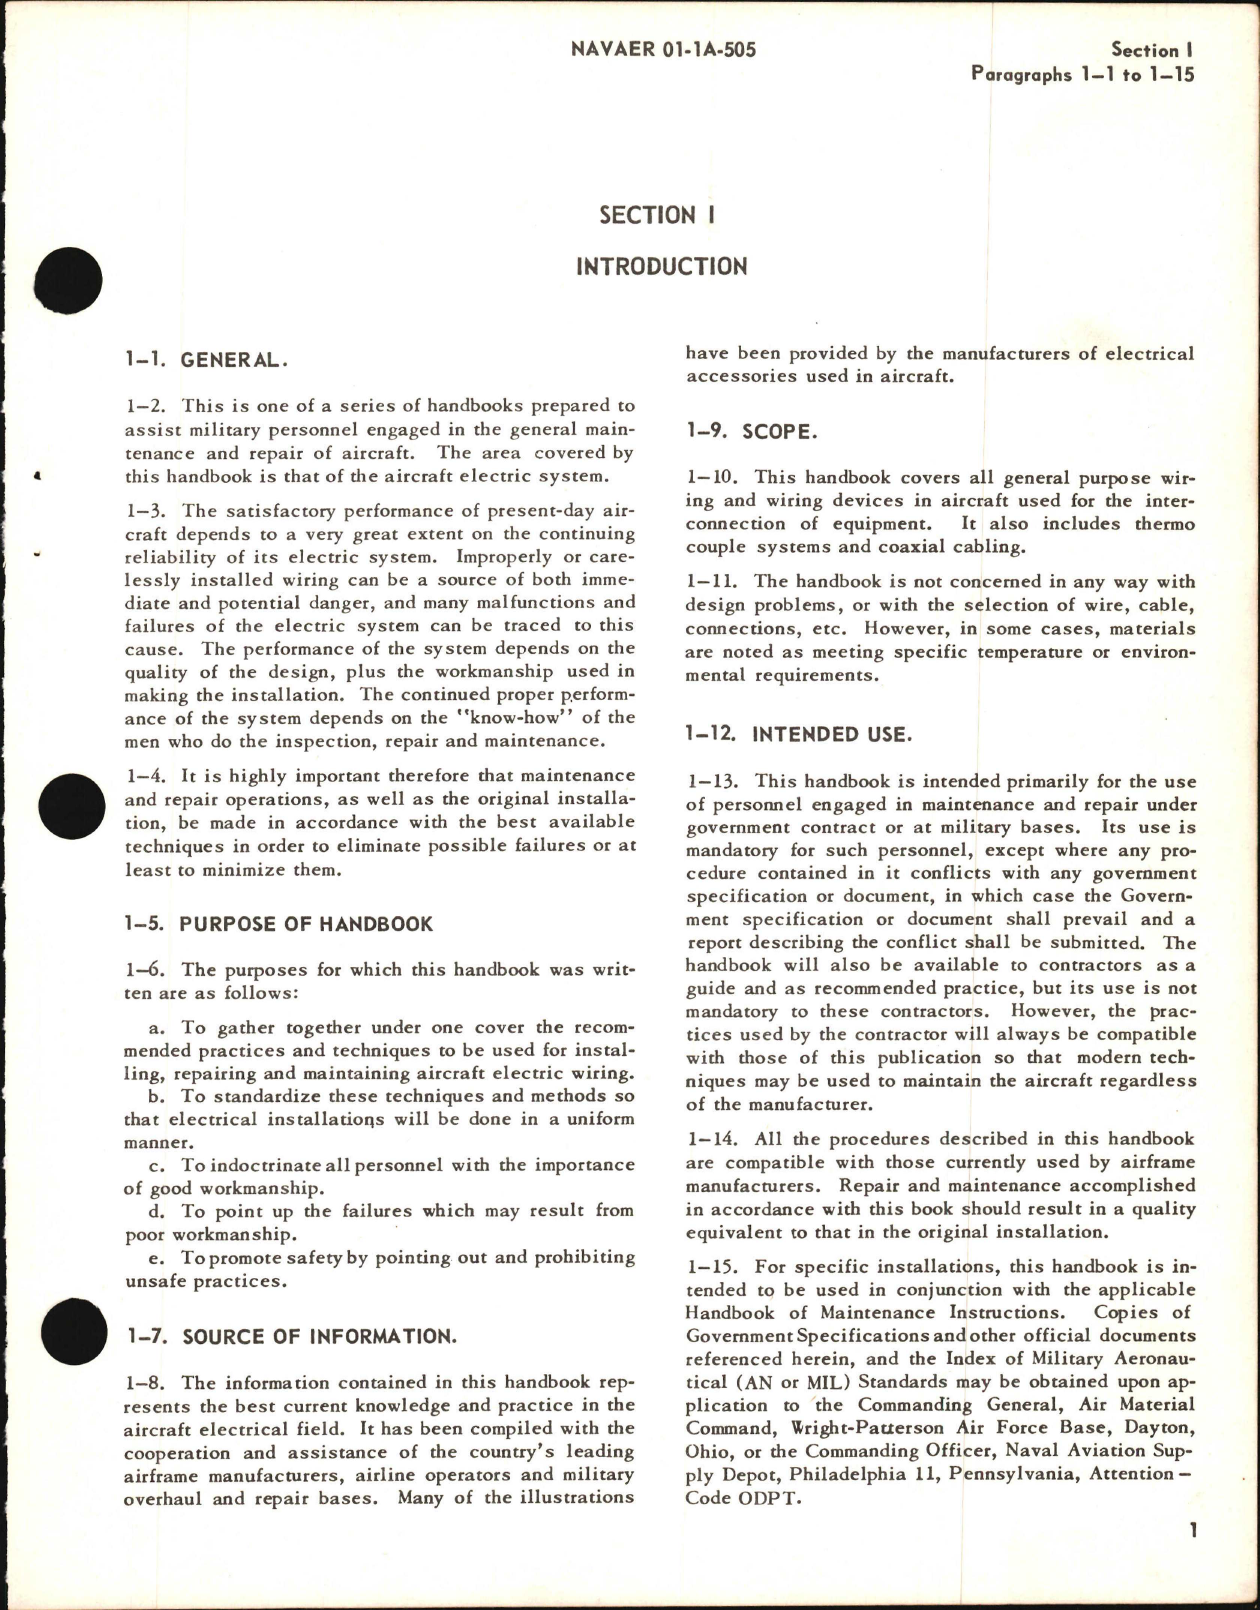 Sample page 5 from AirCorps Library document: Installation Practices for Aircraft Electric & Electronic Wiring